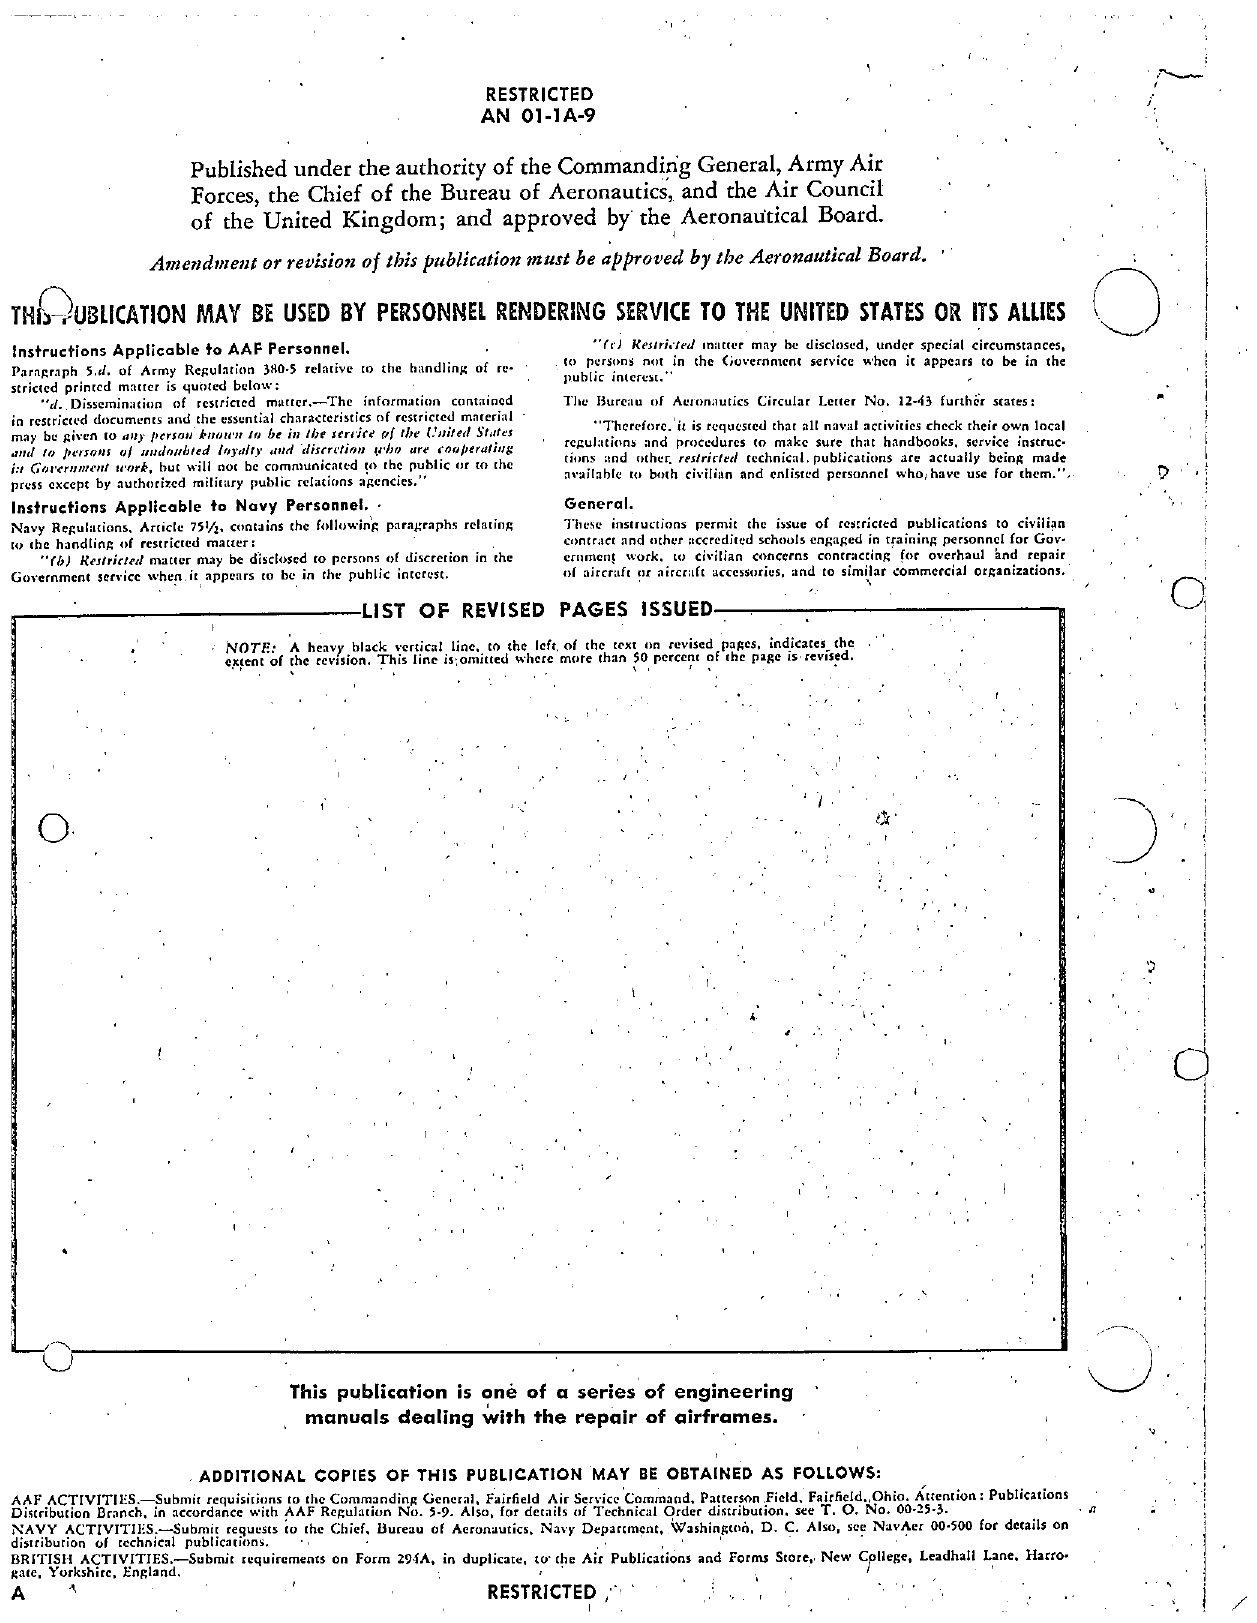 Sample page 2 from AirCorps Library document: United States and British Commonwealth of Nations Aircraft Metals